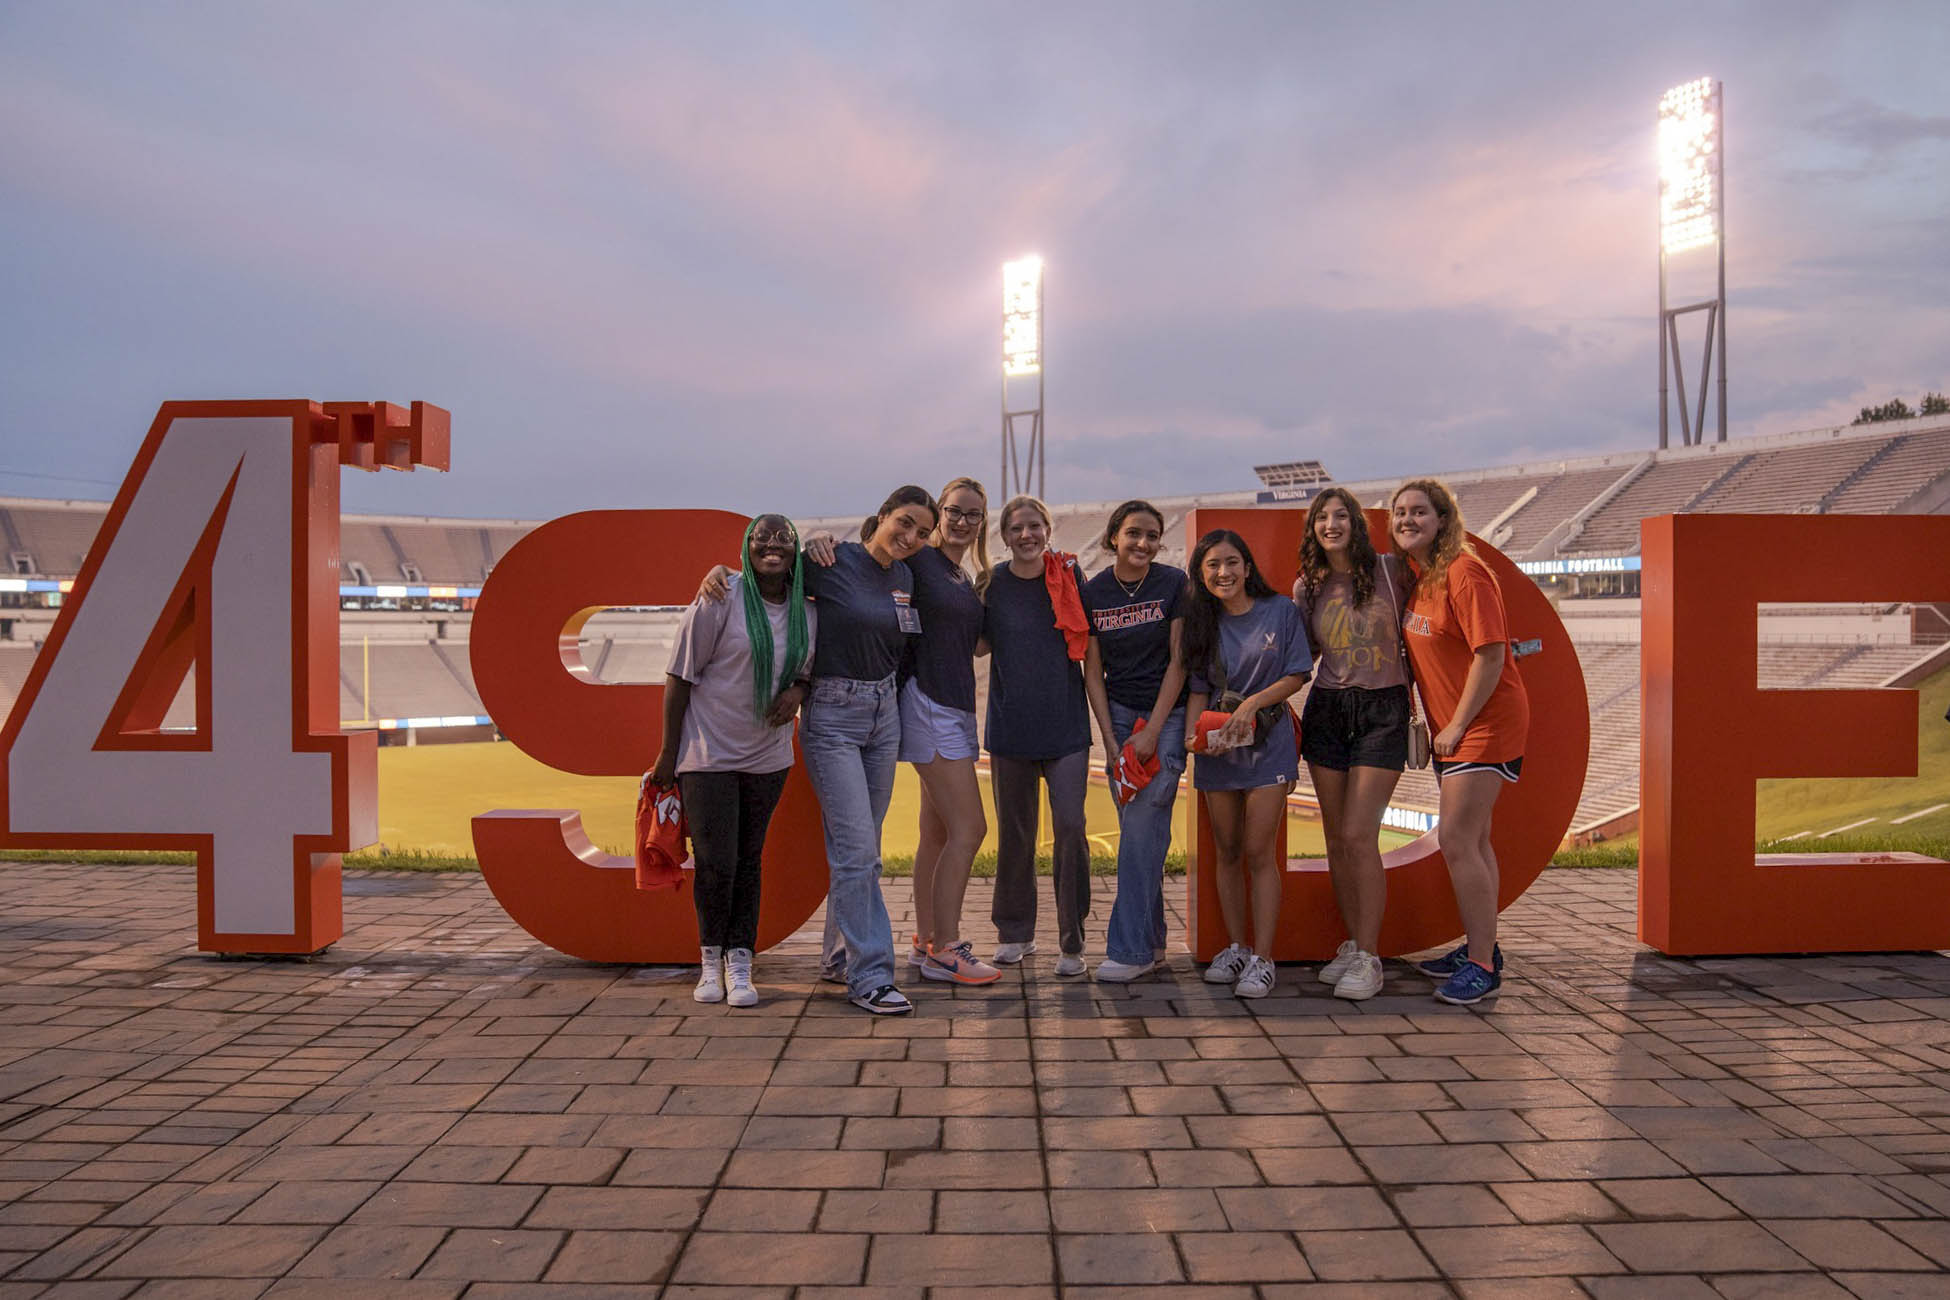 A group of students pose for a group shot in front of large block letters reading 4th SIDE